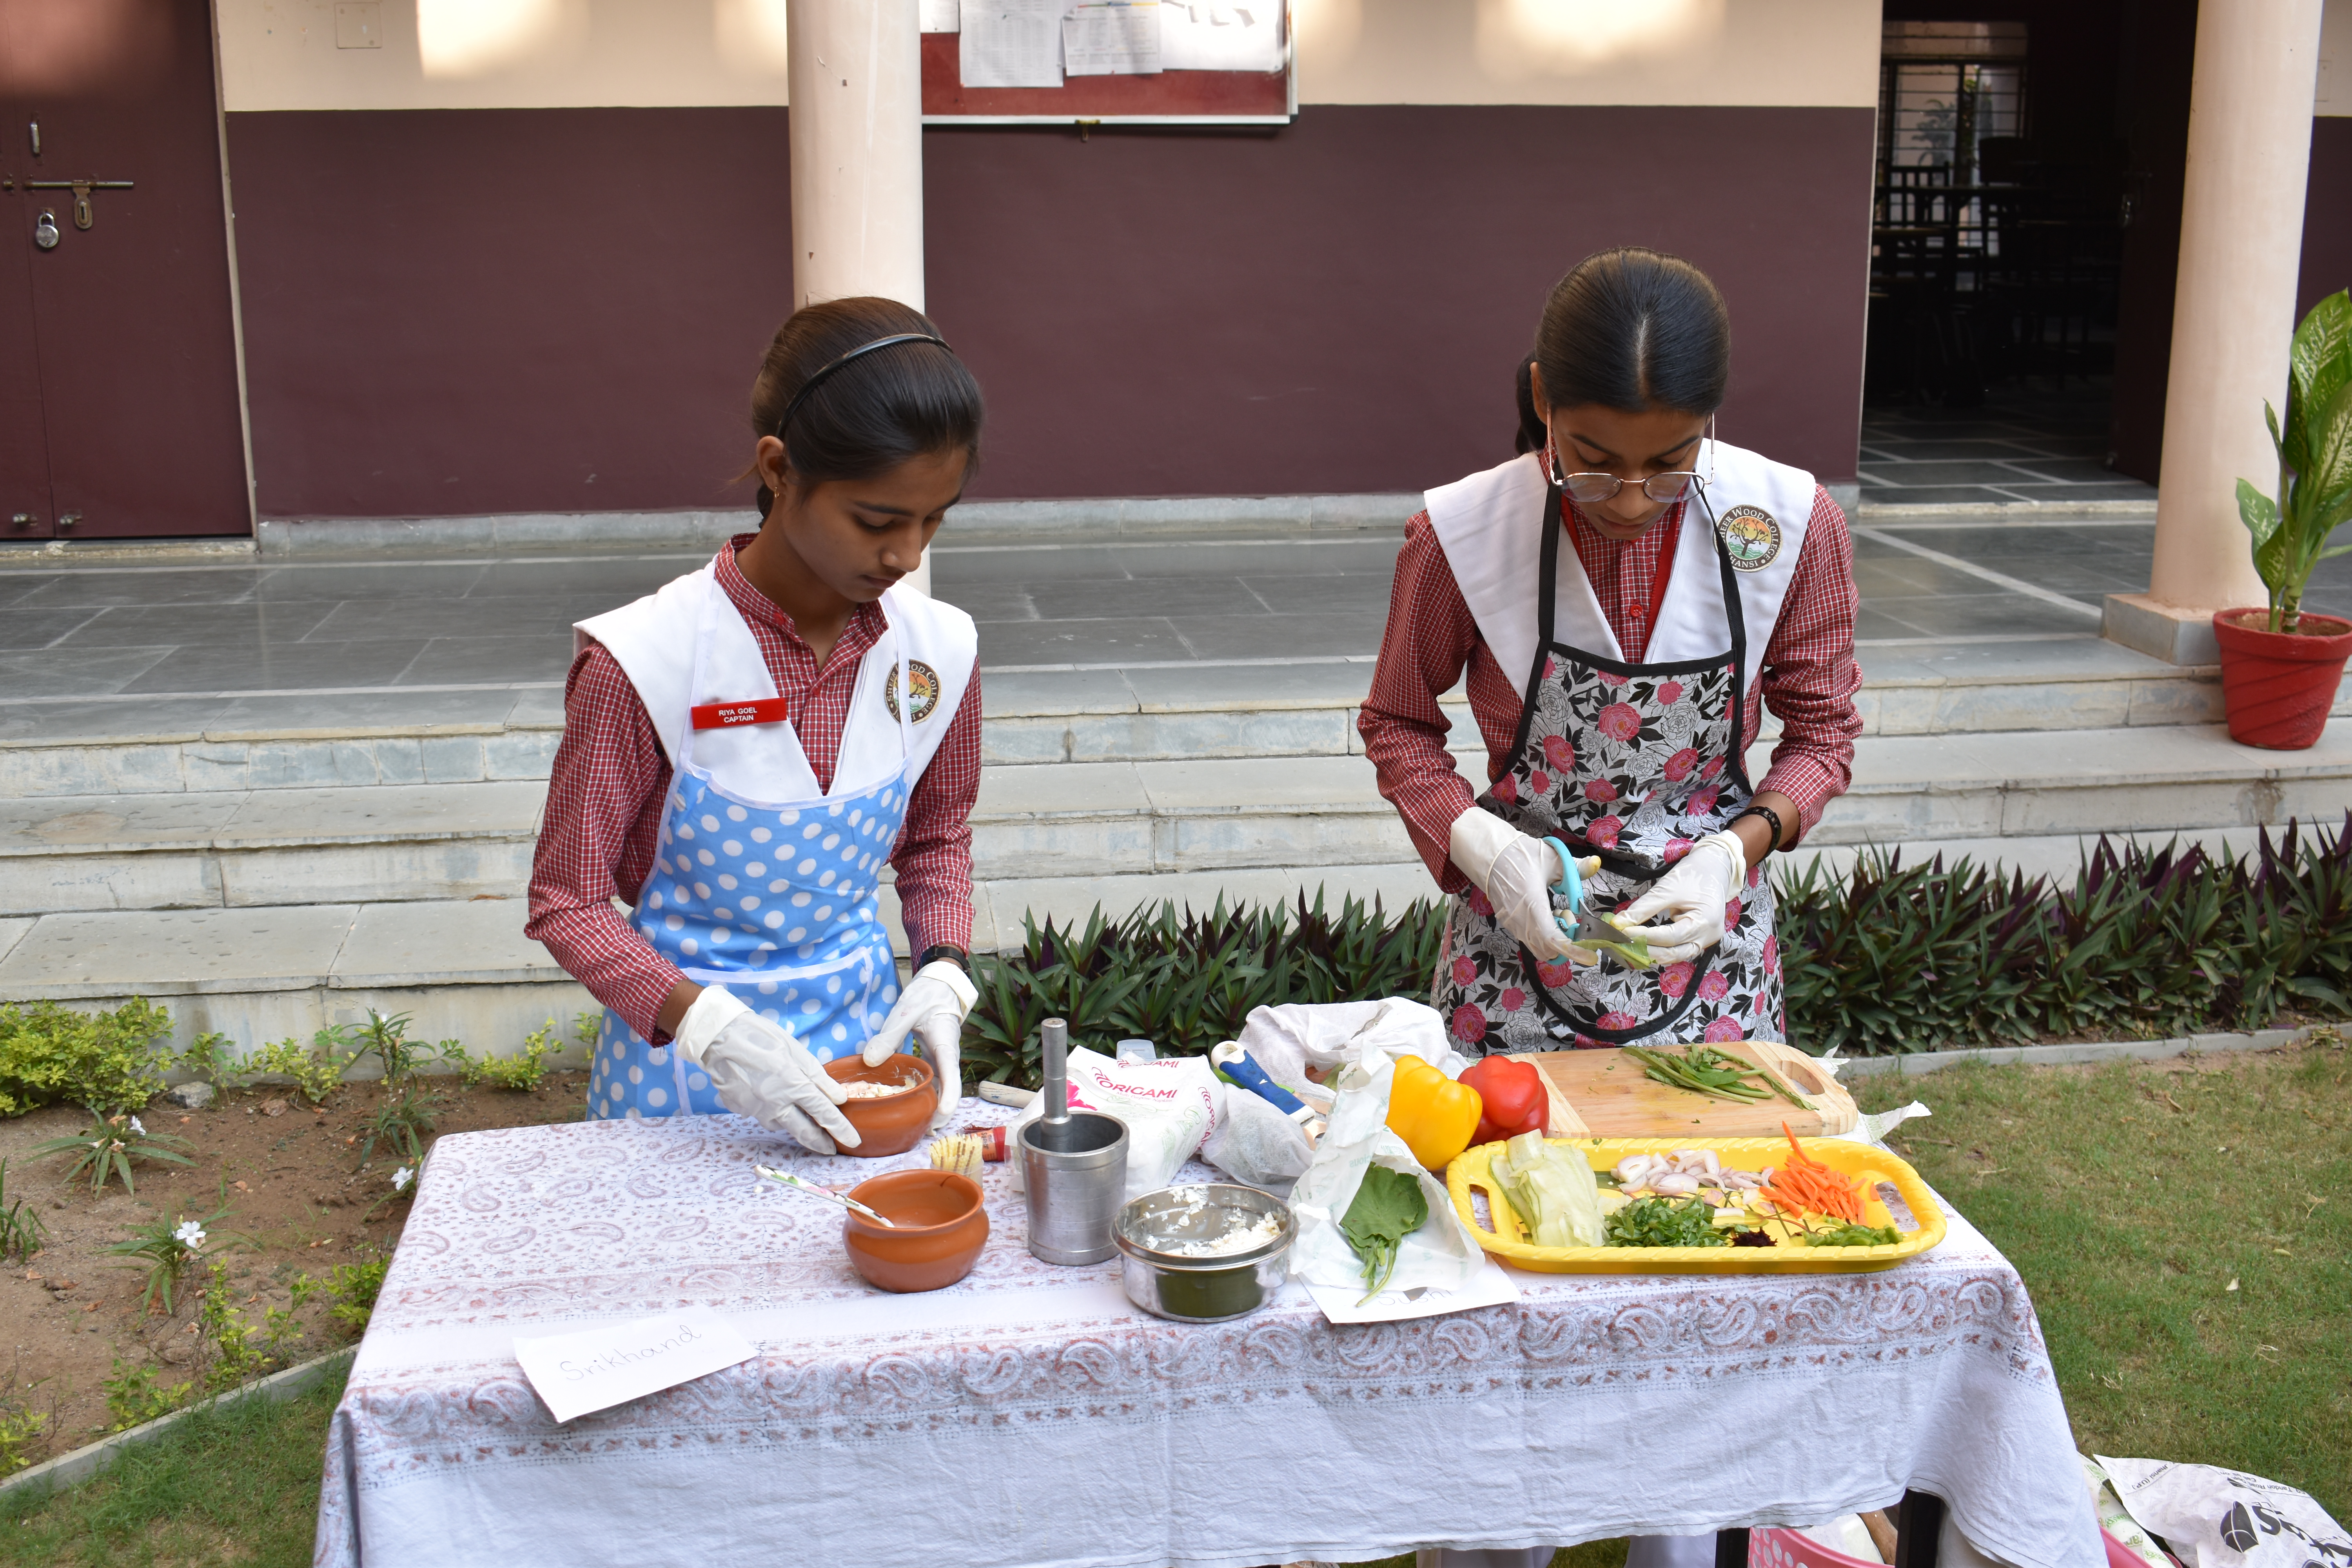 Flameless Cooking Competition held on 18th October 23